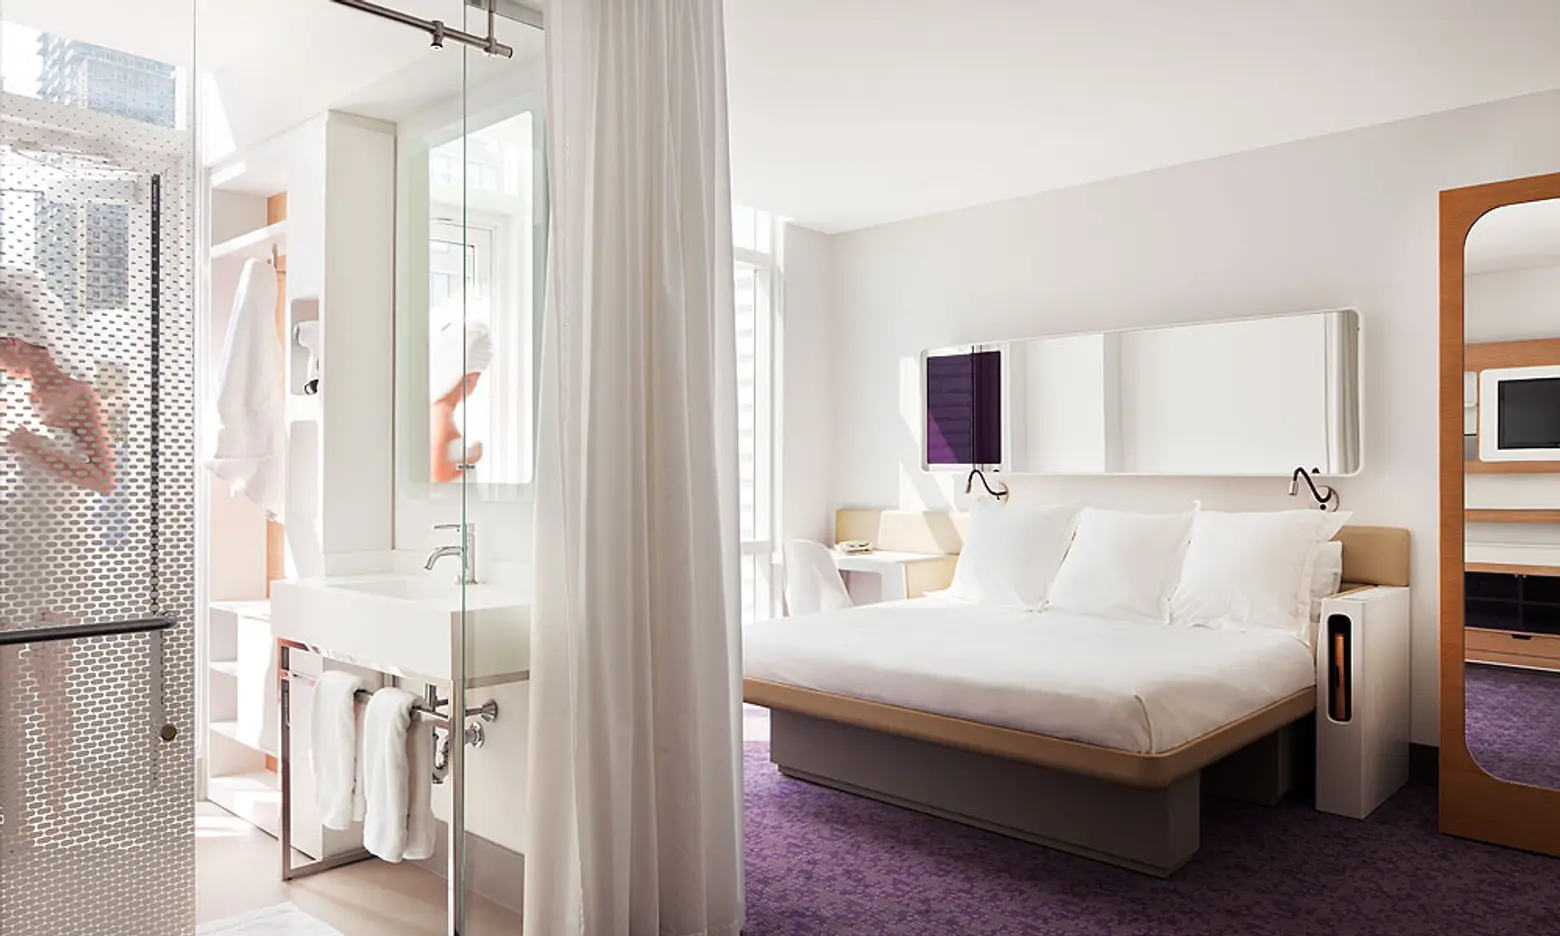 Yotel, Yotel NYC, NYC Hotel, Luxury Hotels NYC, NYC's tiniest hotel, Cool NYC Hotels, where to stay in NYC, cool hotel designs, tiny hotels, tiny luxury hotel, new york hotels,